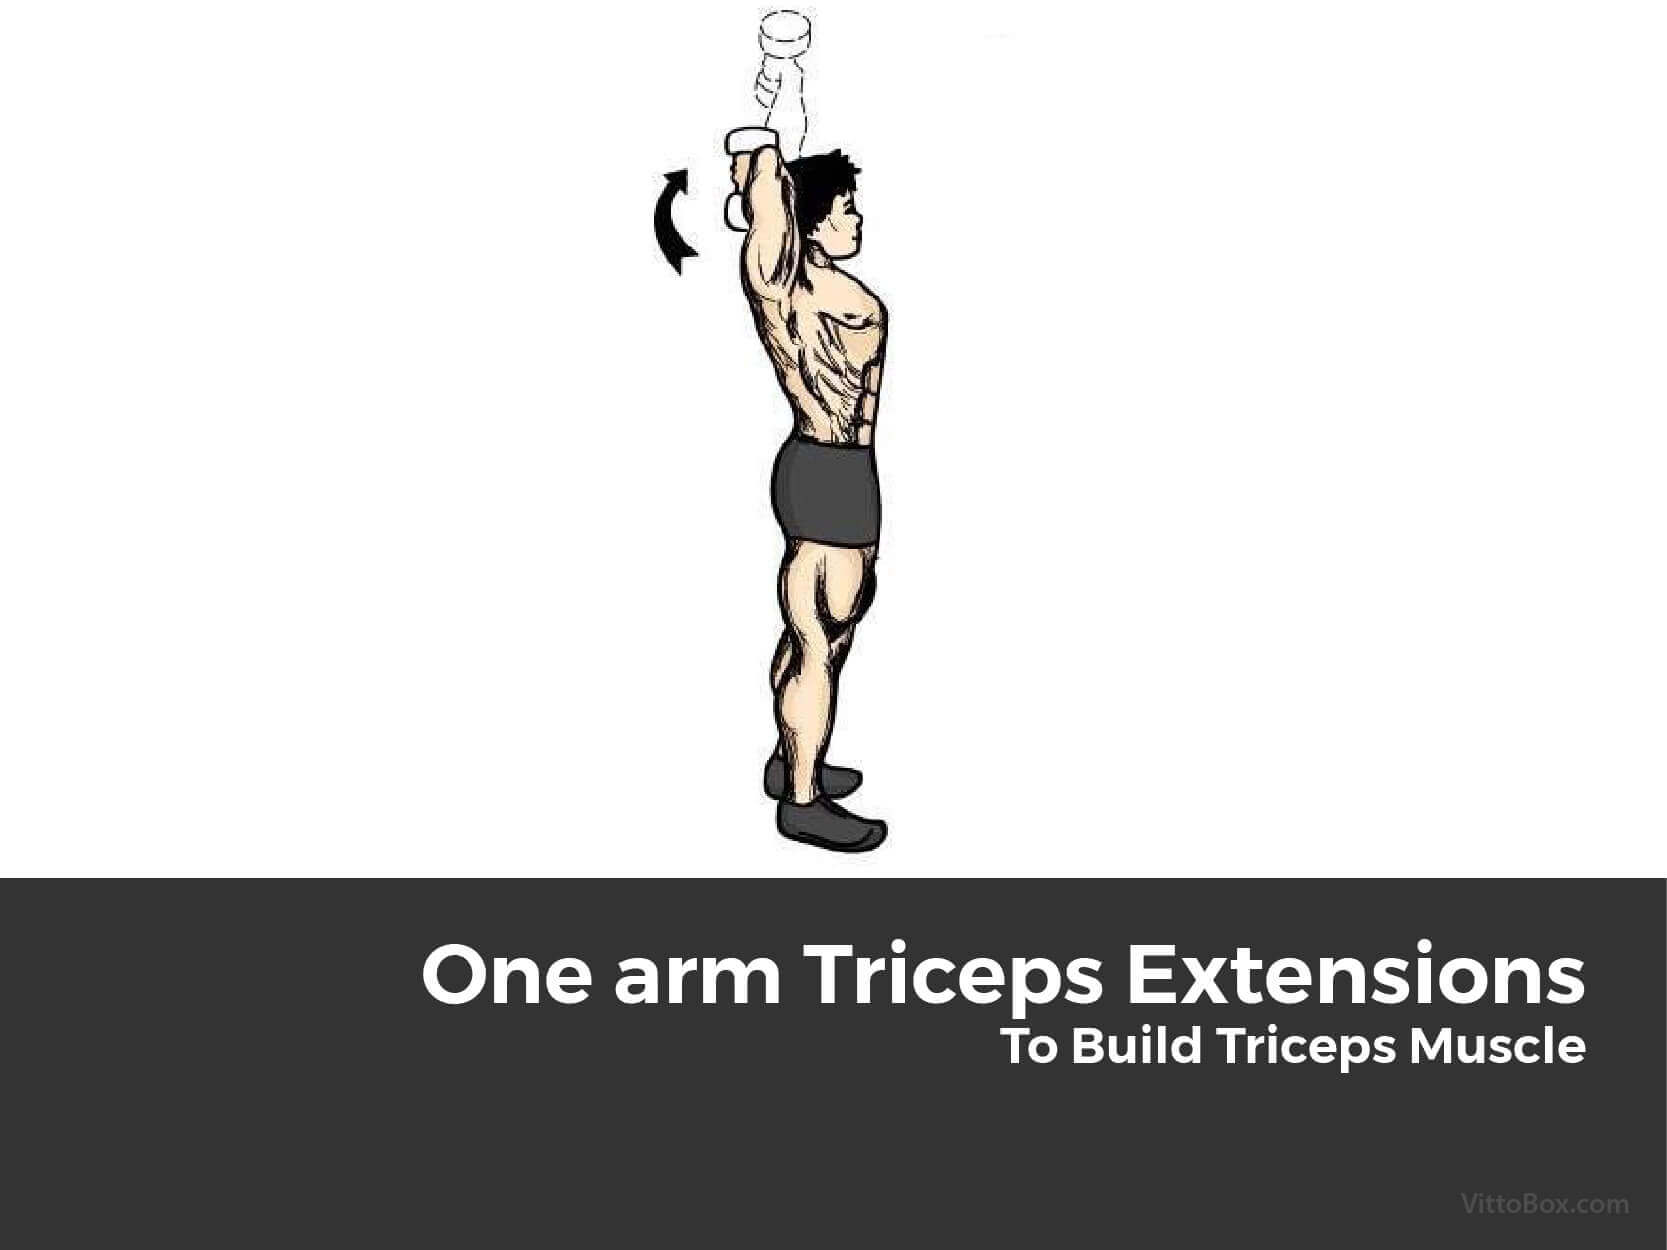 One Arm Triceps Extensions To Build Triceps Muscle